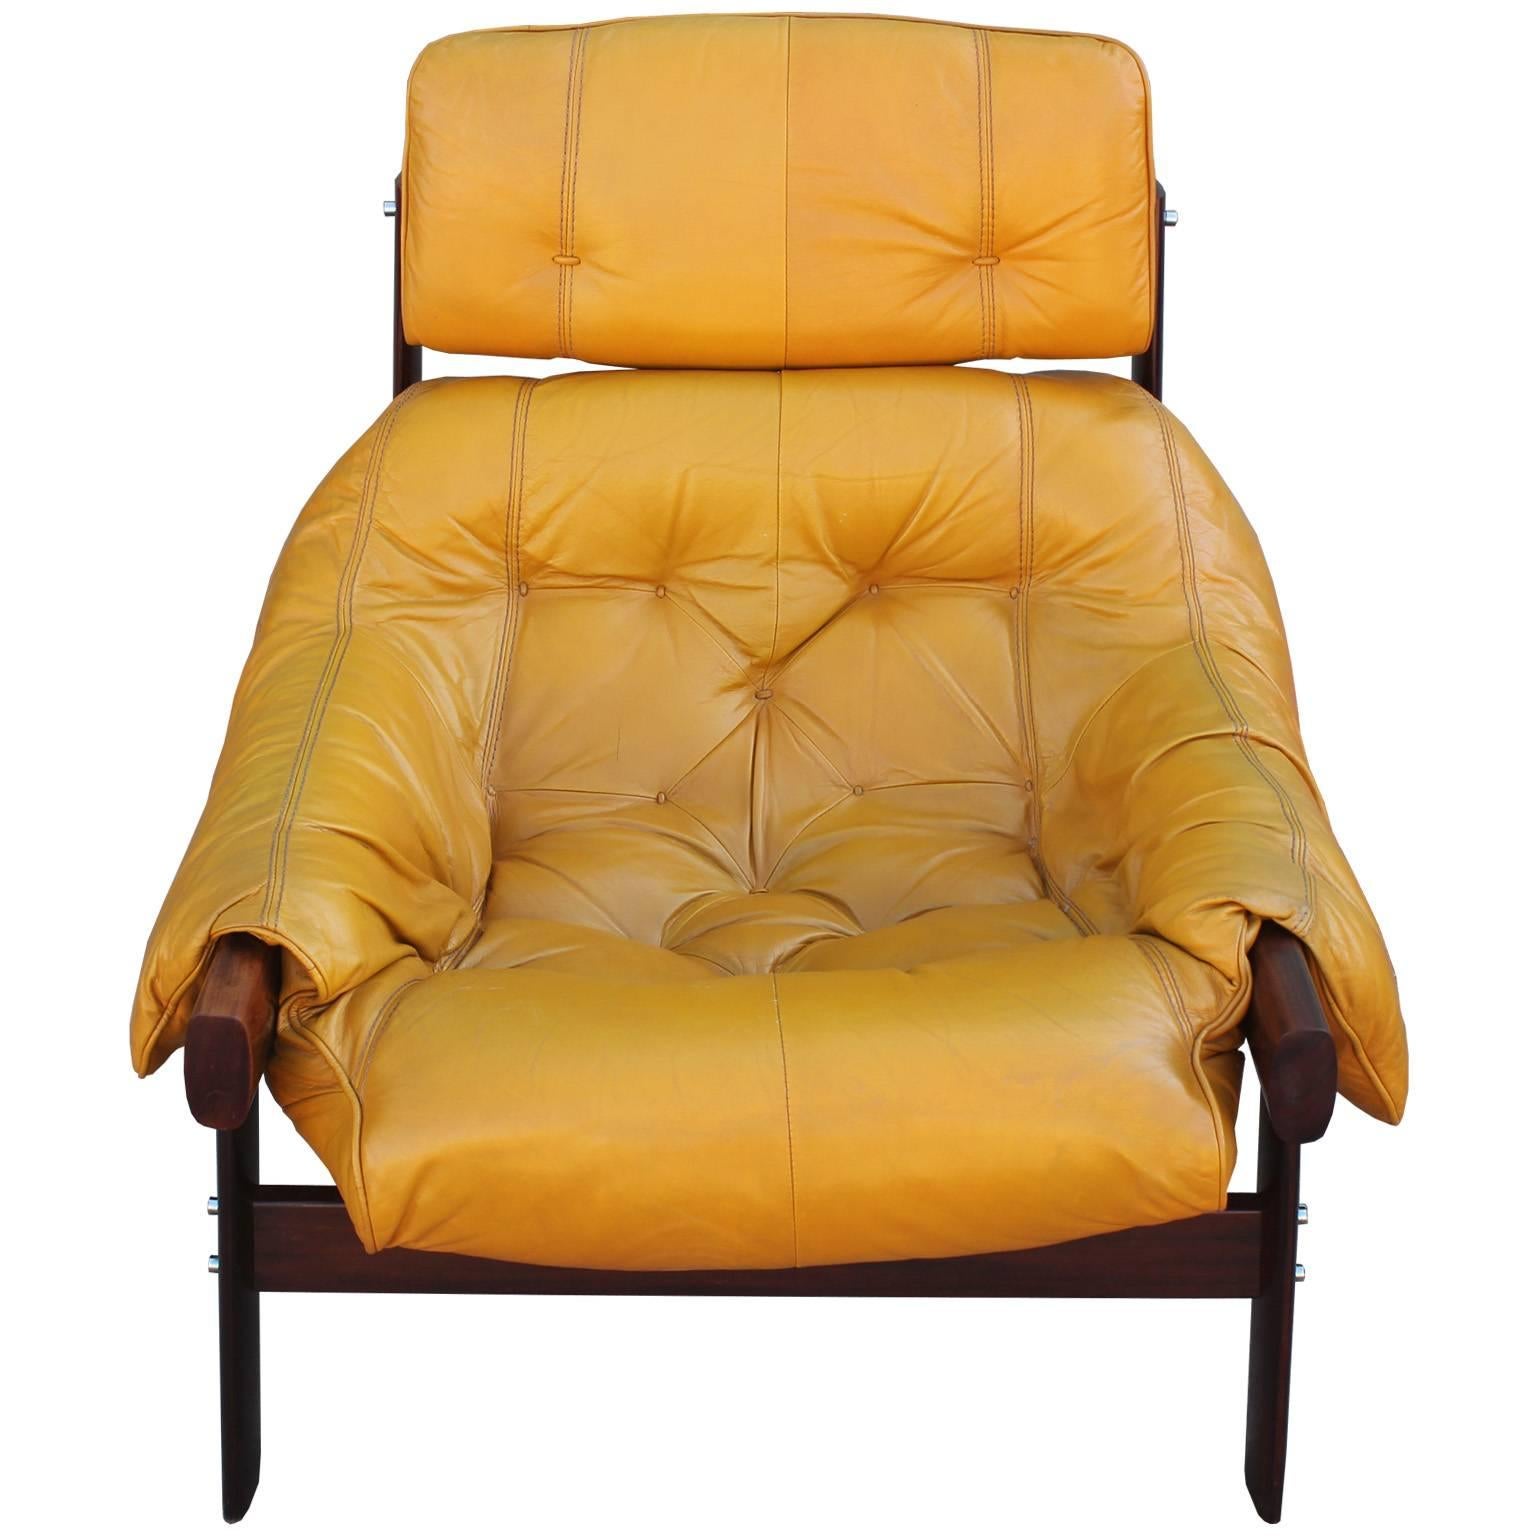 Percival Lafer Brazilian mustard yellow lounge chair with ottoman. The wonderful chair has a supple leather with lots of detail and stitching. Great Design. In excellent vintage condition with a few very minor flaws to the leather that are basically